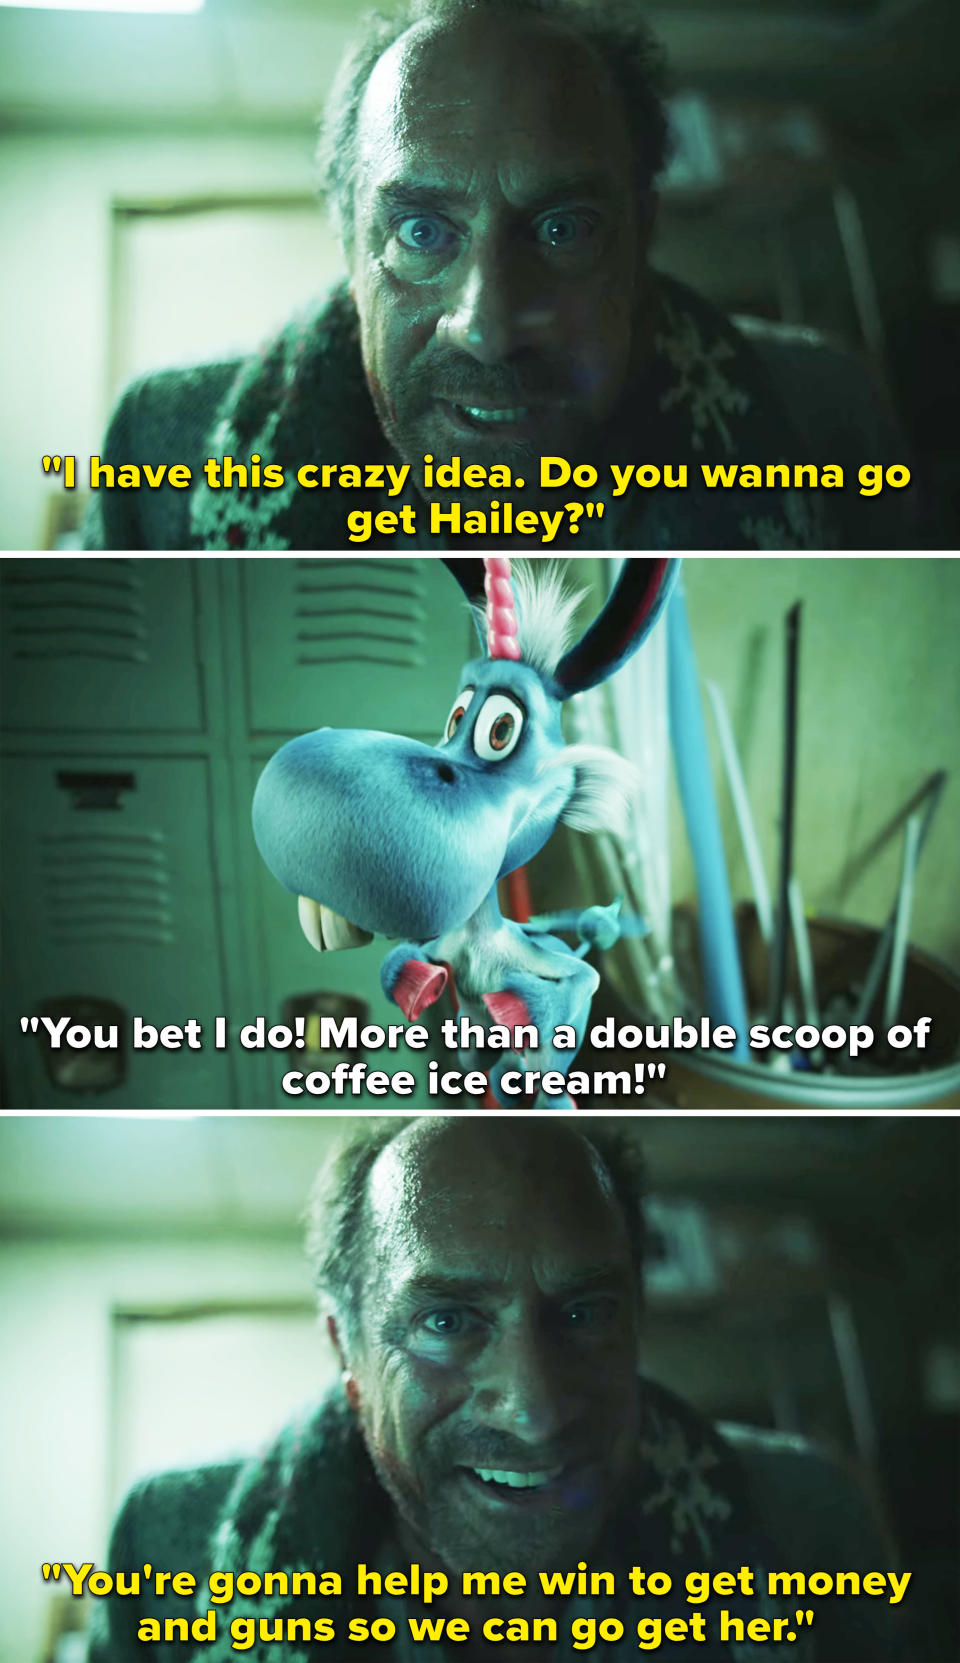 christopher's character saying, i have this crazy idea, do you wanna go get hailey